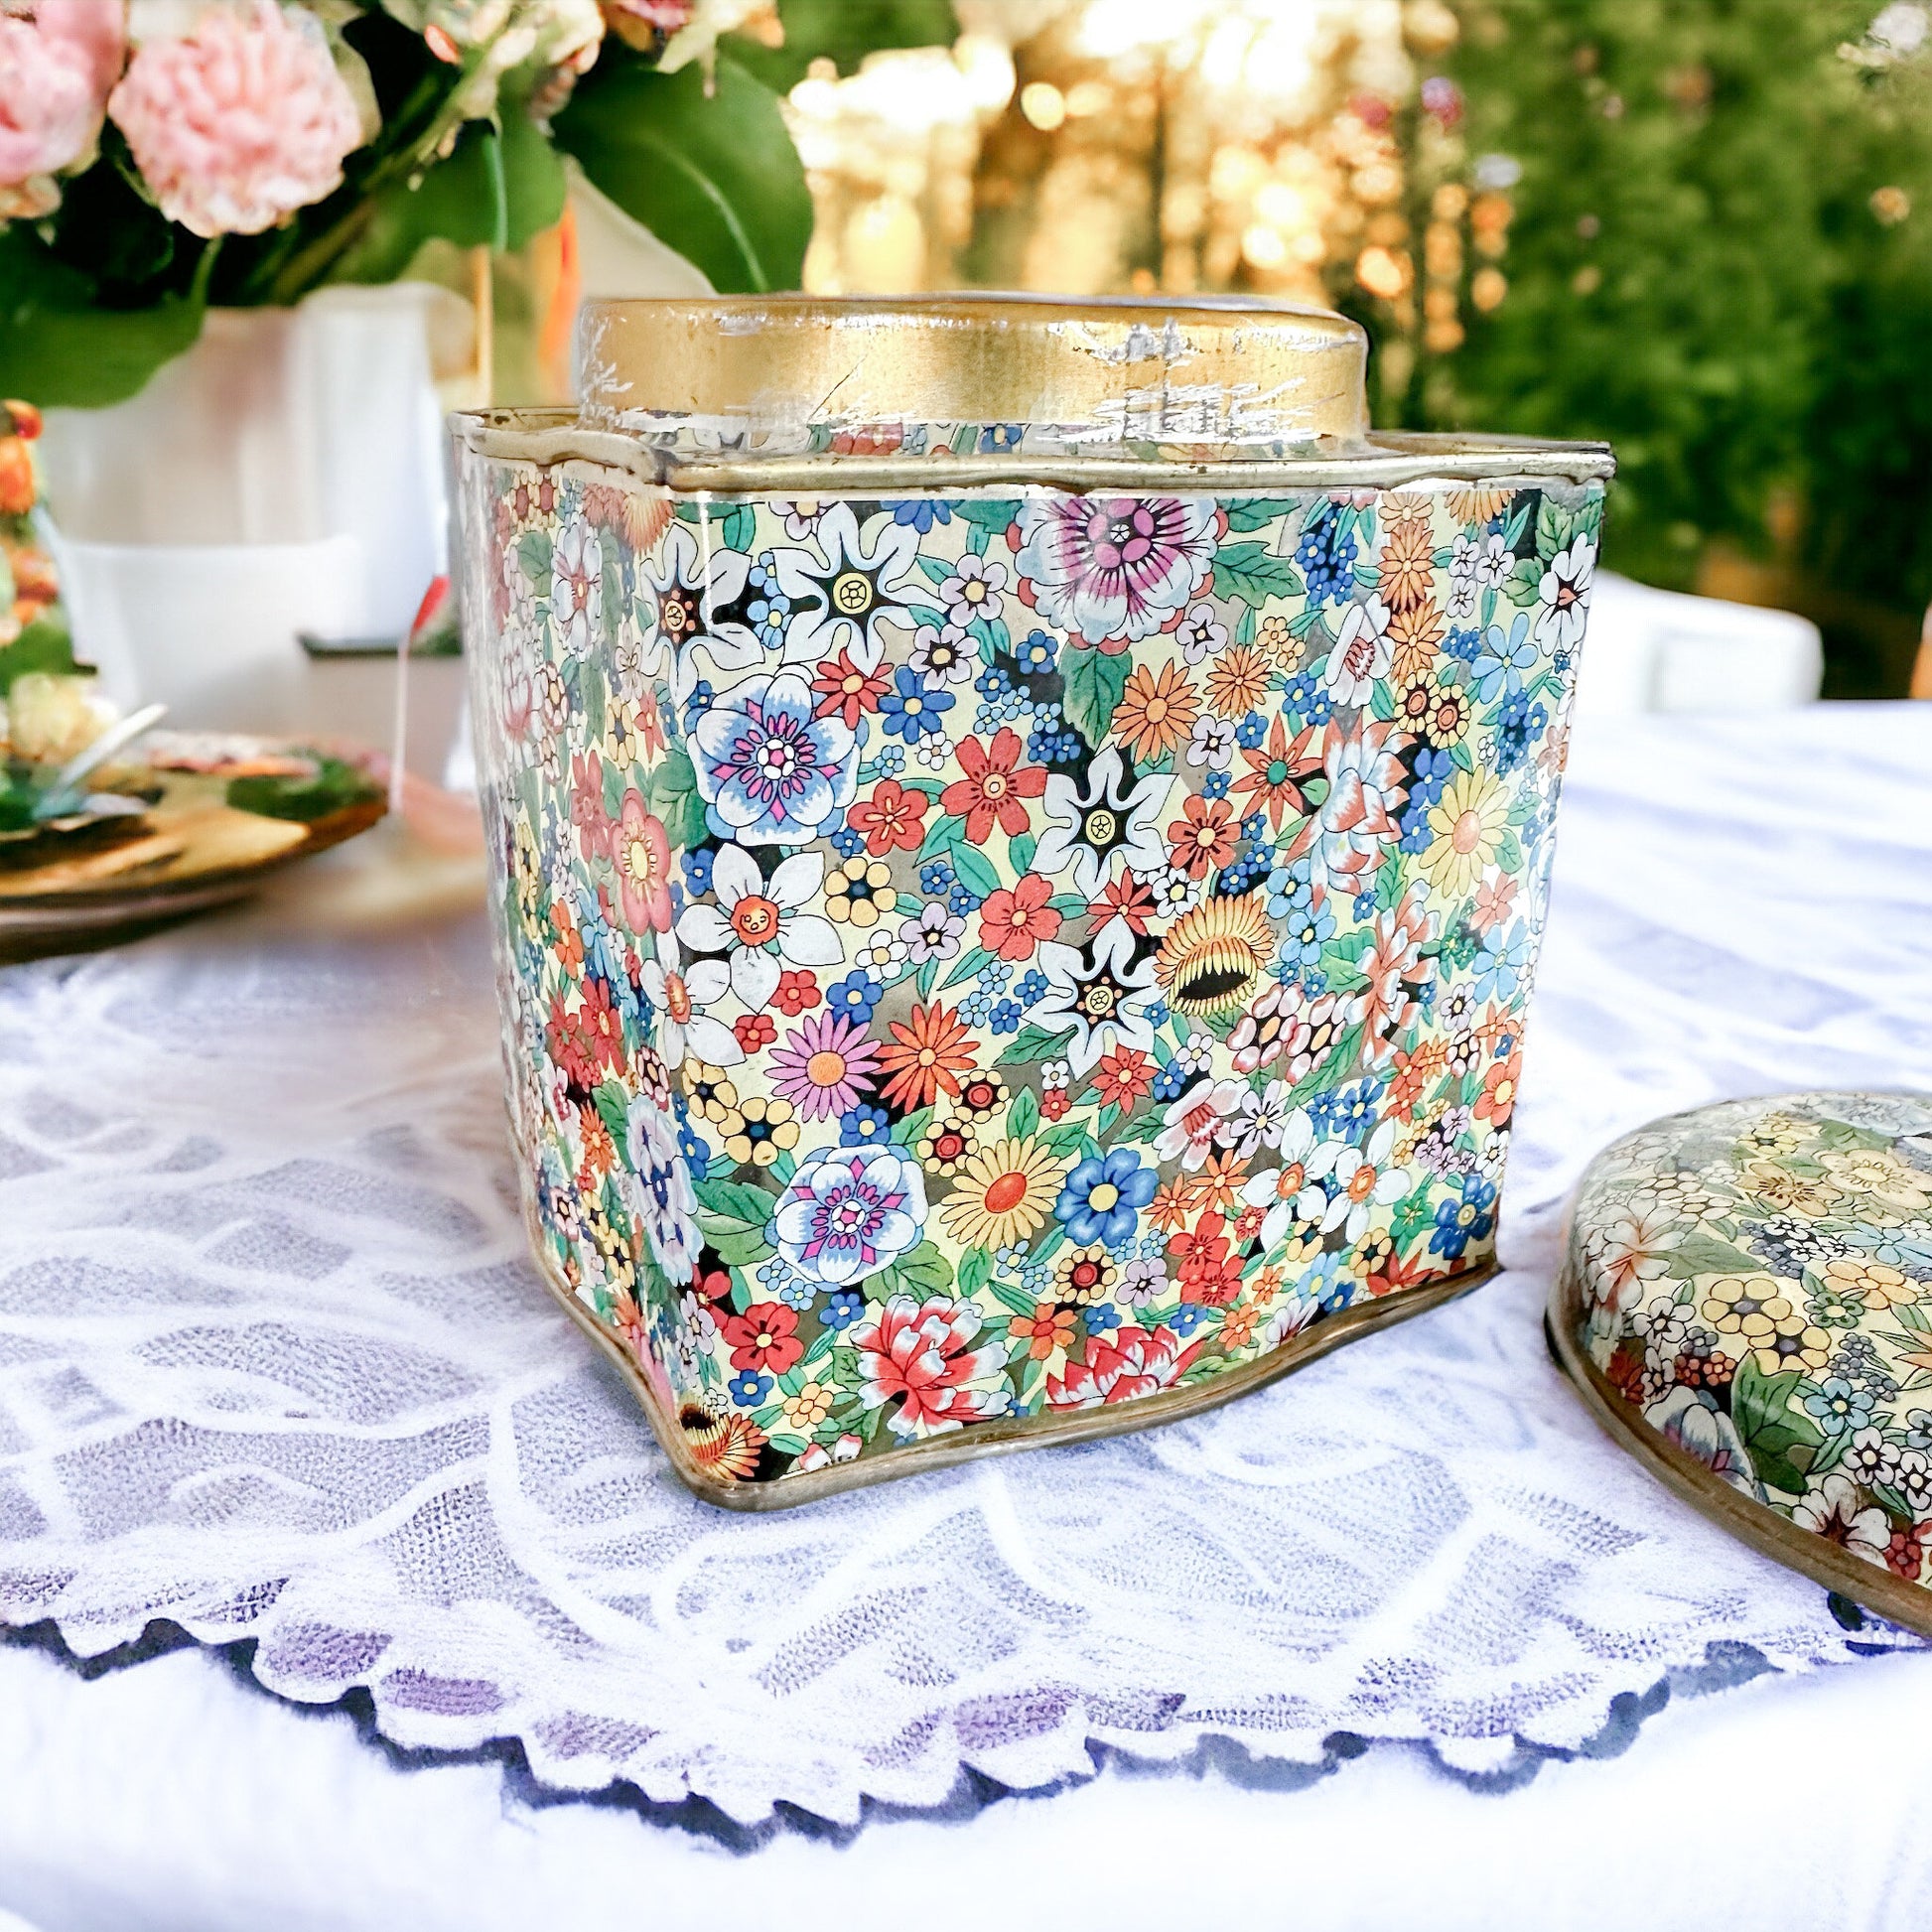 Soy Candle, Vintage Tins, Unique Gifts, Best Friend Gifts